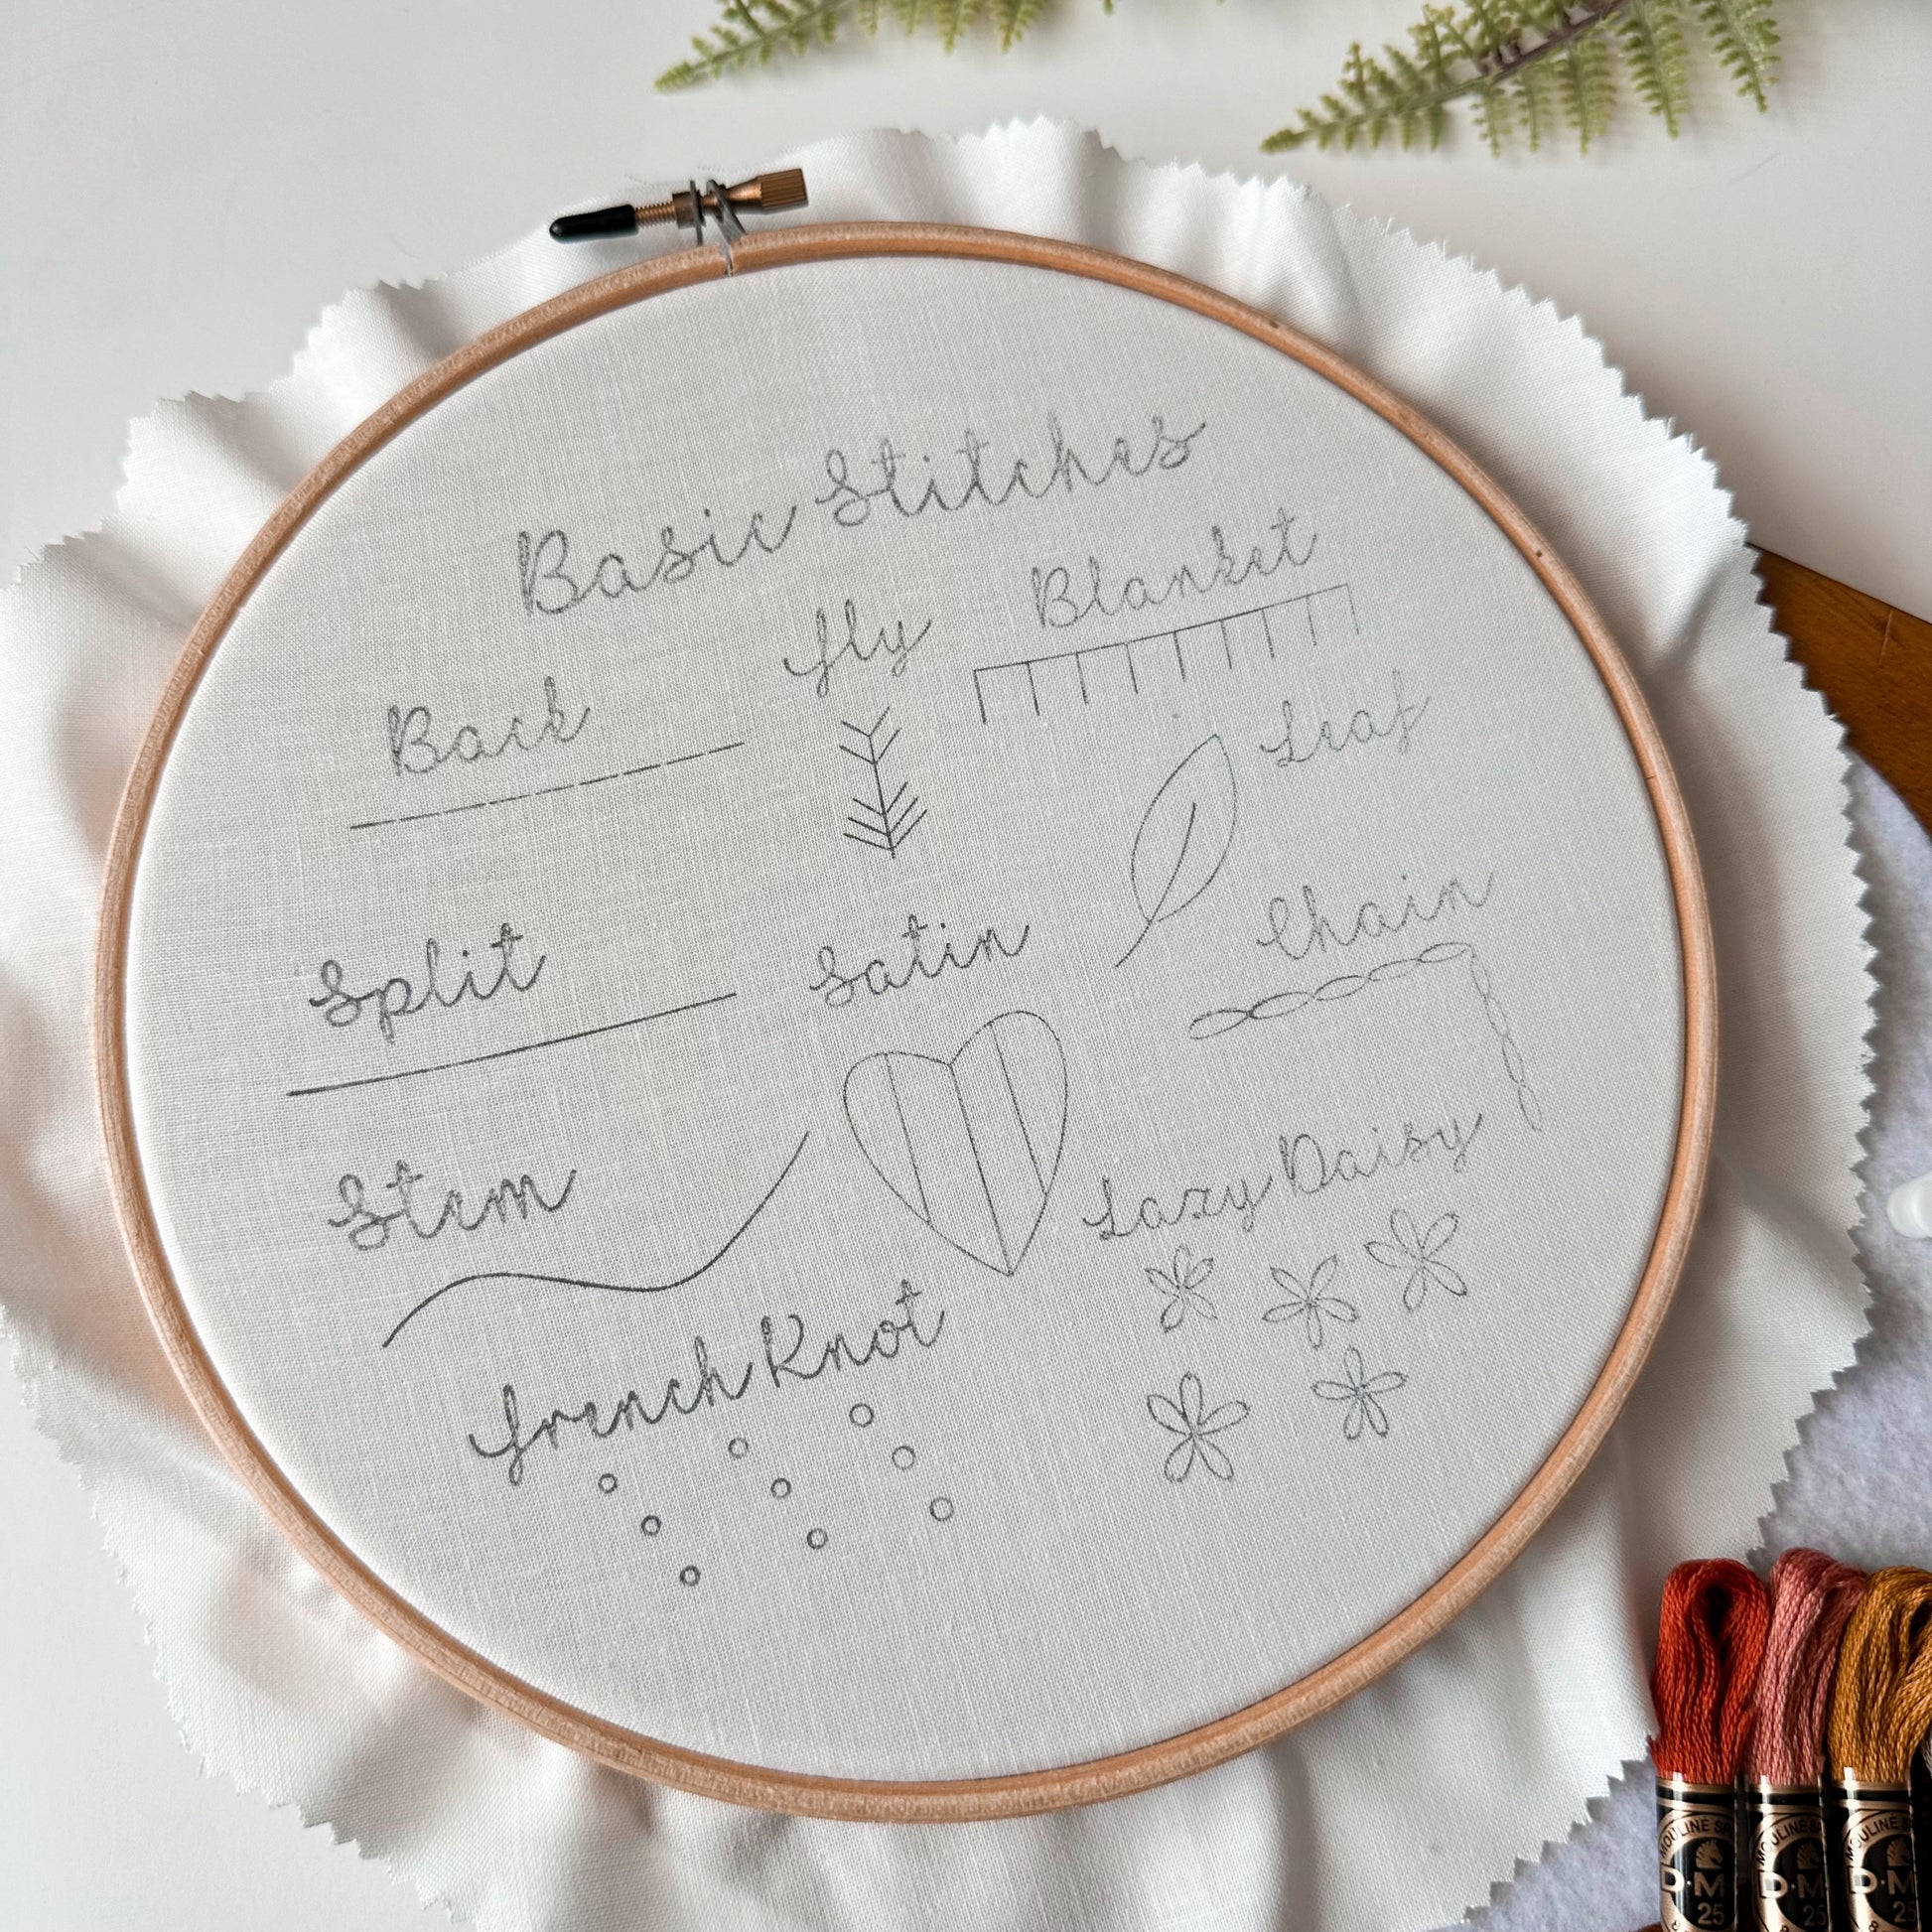 Learn Embroidery Stitch Sampler Beginner Embroidery Kit – Little Stitchy Bee